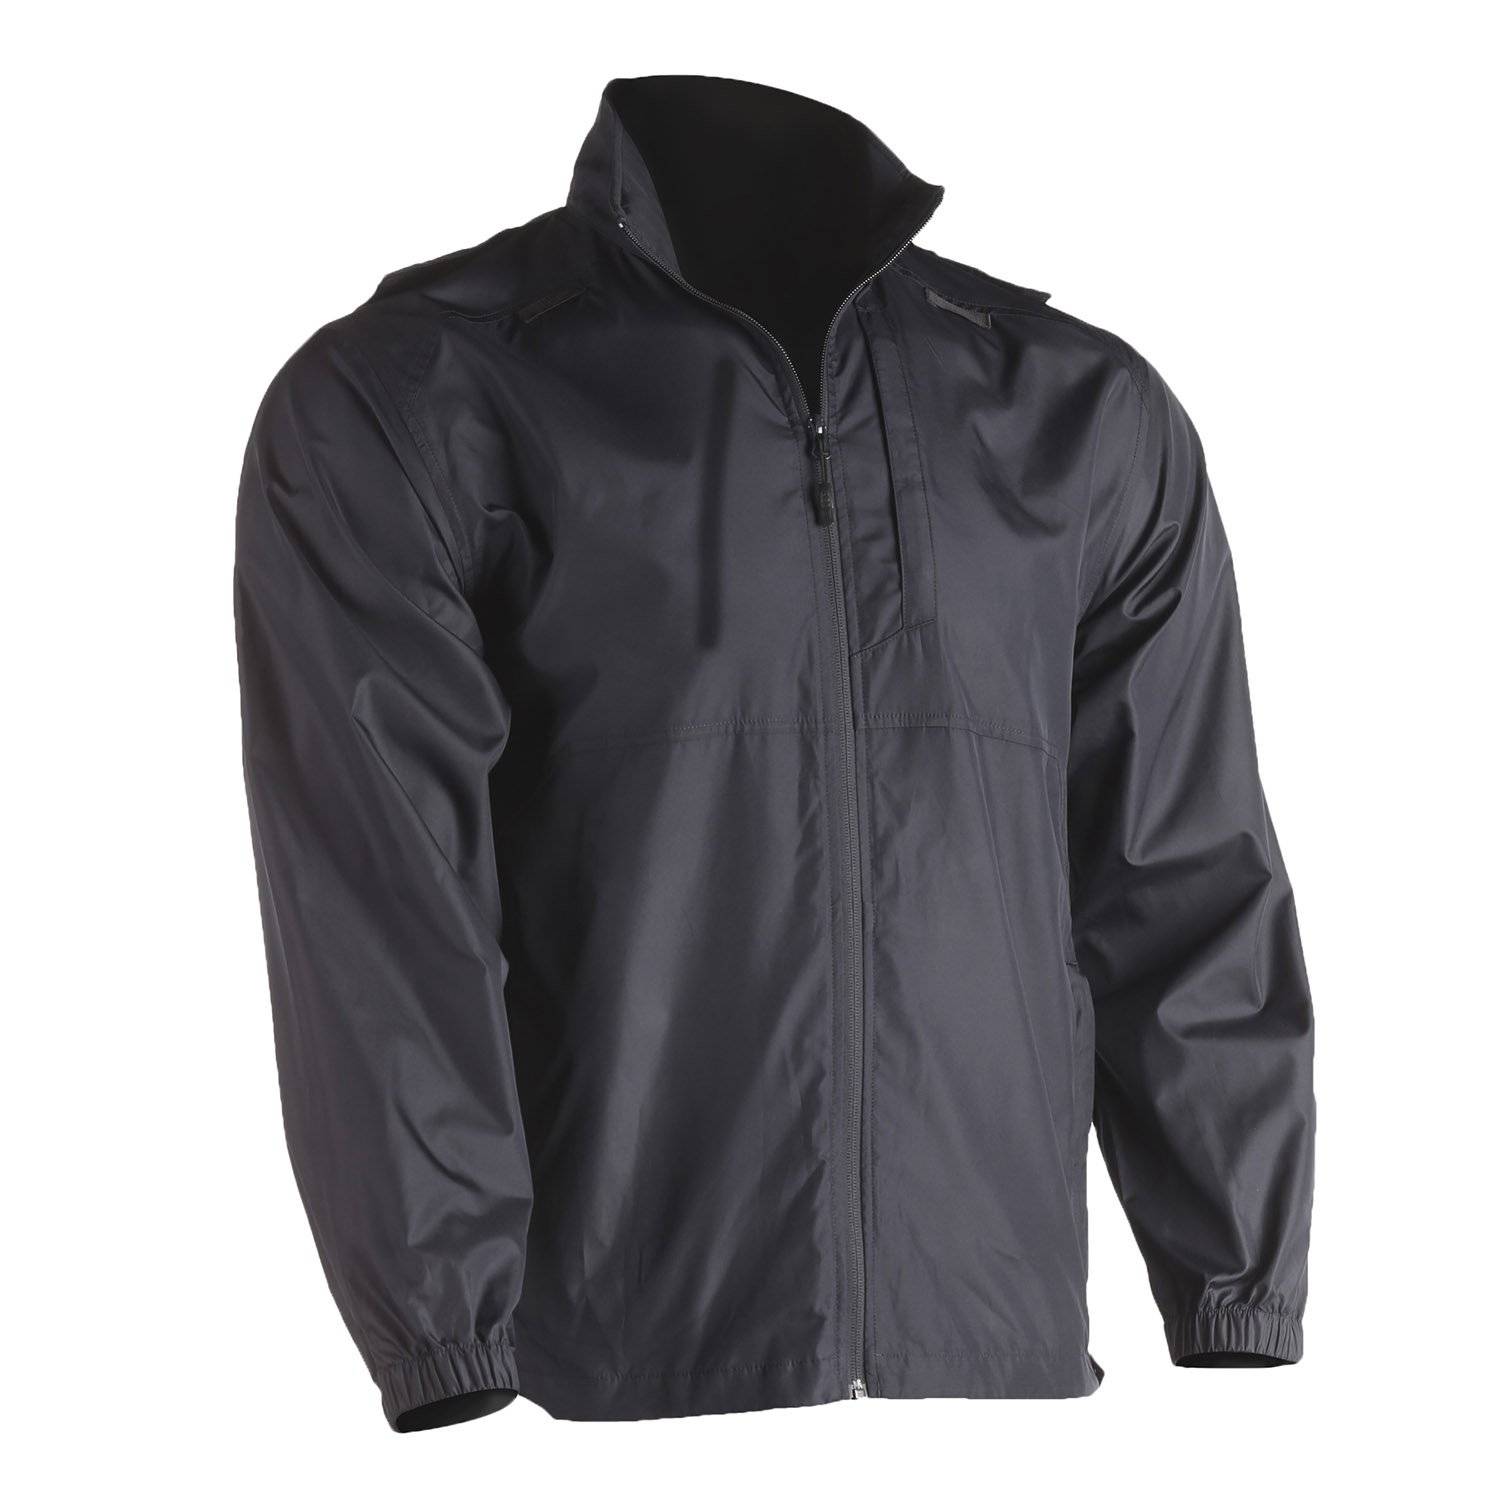 5.11 TACTICAL PACKABLE OPERATOR JACKET